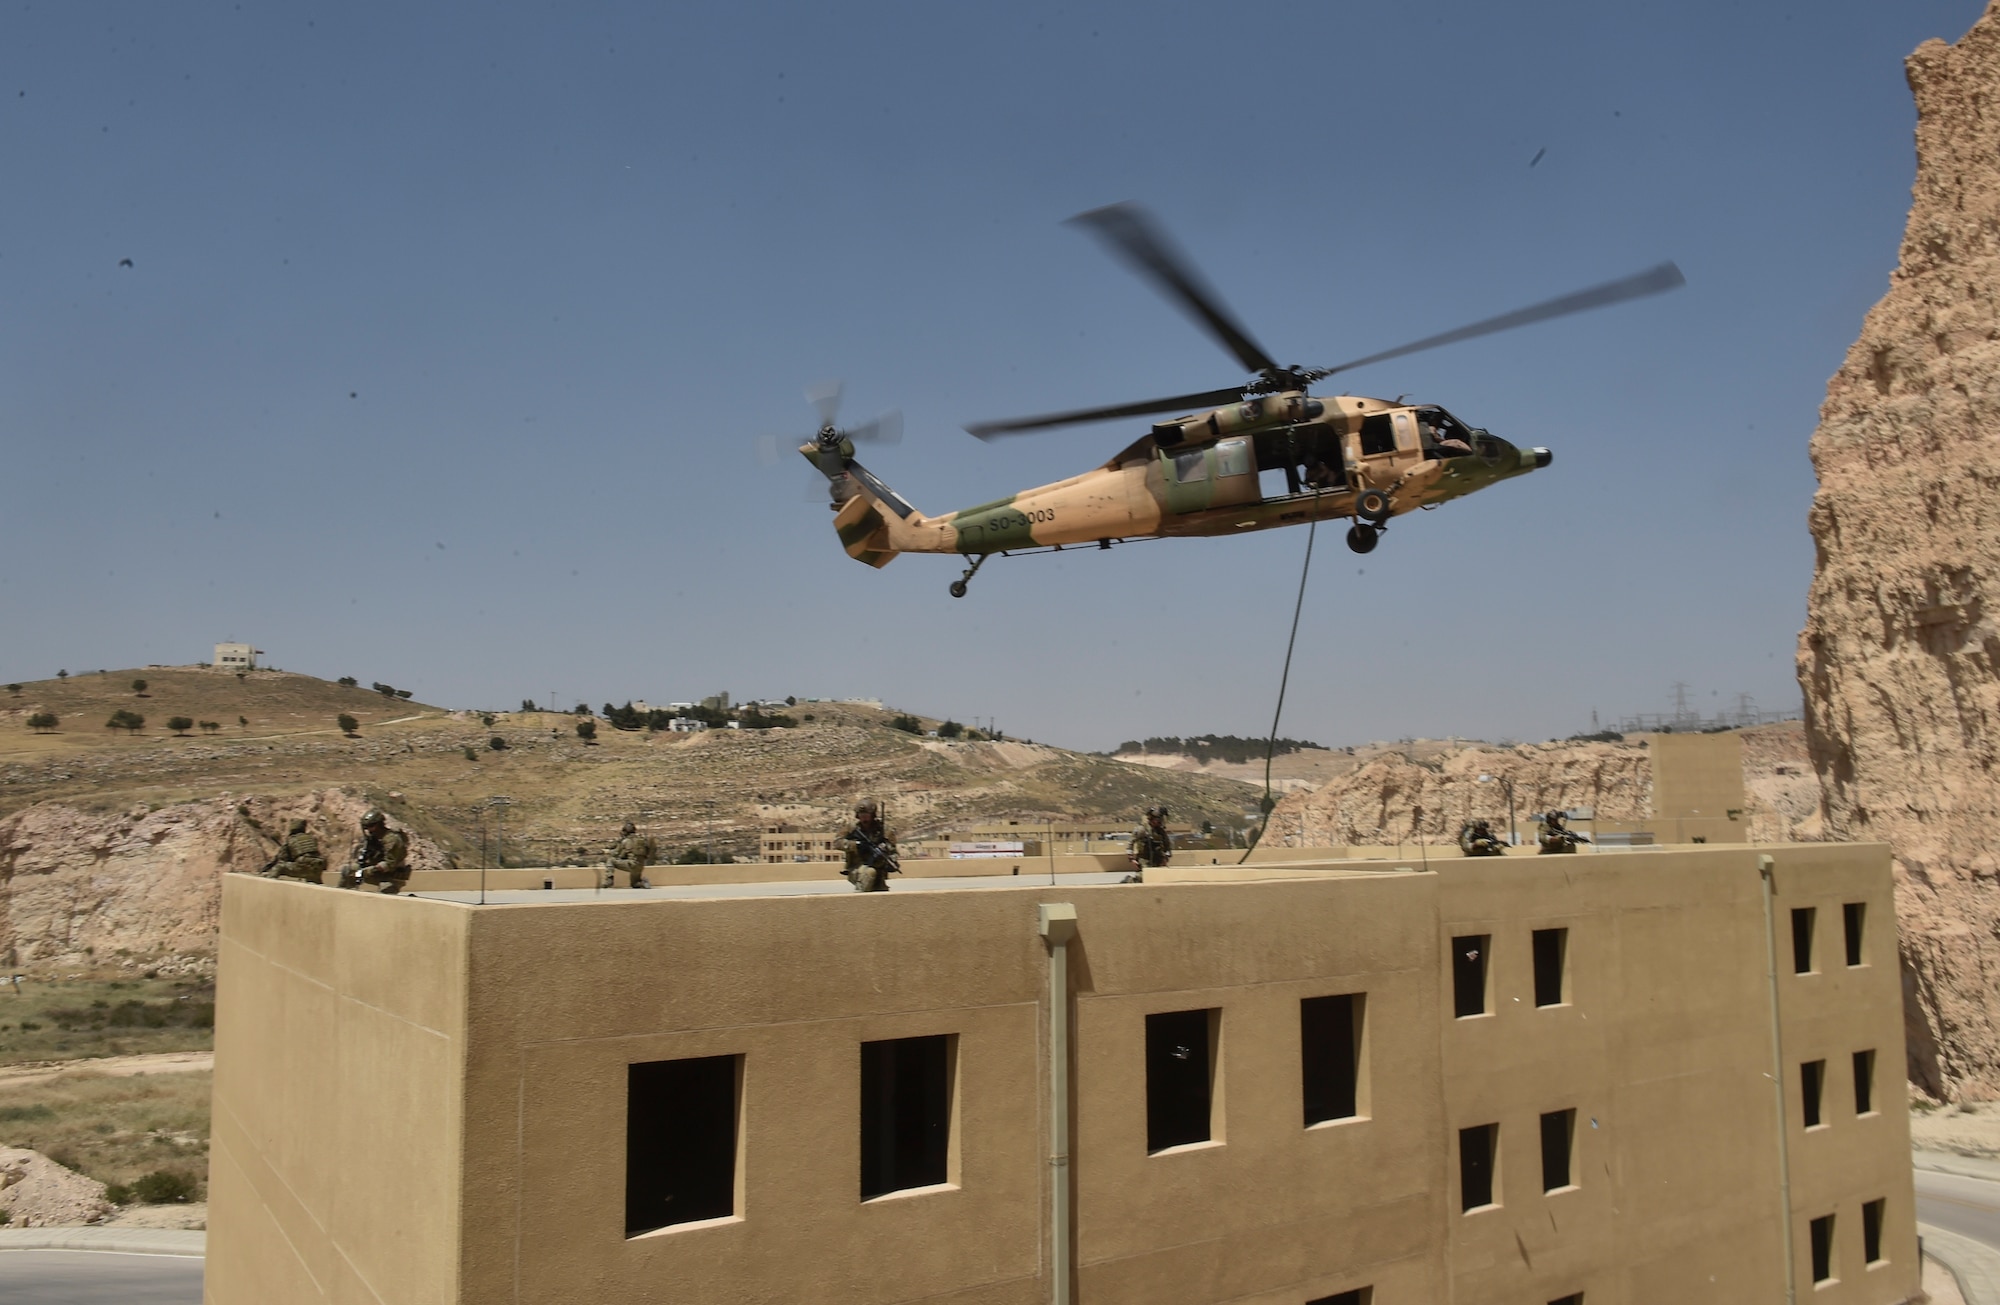 Italian special operations forces, U.S. Air Force Special Tactics and members of the Jordanian Armed Forces Special Task Force fast rope from a Royal Jordanian Air Force UH-60L Blackhawk helicopter onto a three-story building during Exercise Eager Lion May 11, 2017, at King Abdullah II Special Operations Training Center. Eager Lion is an annual U.S. Central Command exercise in Jordan designed to strengthen military-to-military relationships between the U.S., Jordan and other international partners. This year's iteration is comprised of about 7,200 military personnel from more than 20 nations that will respond to scenarios involving border security, command and control, cyber defense and battlespace management. (U.S. Air Force photo by Senior Airman Ryan Conroy) 